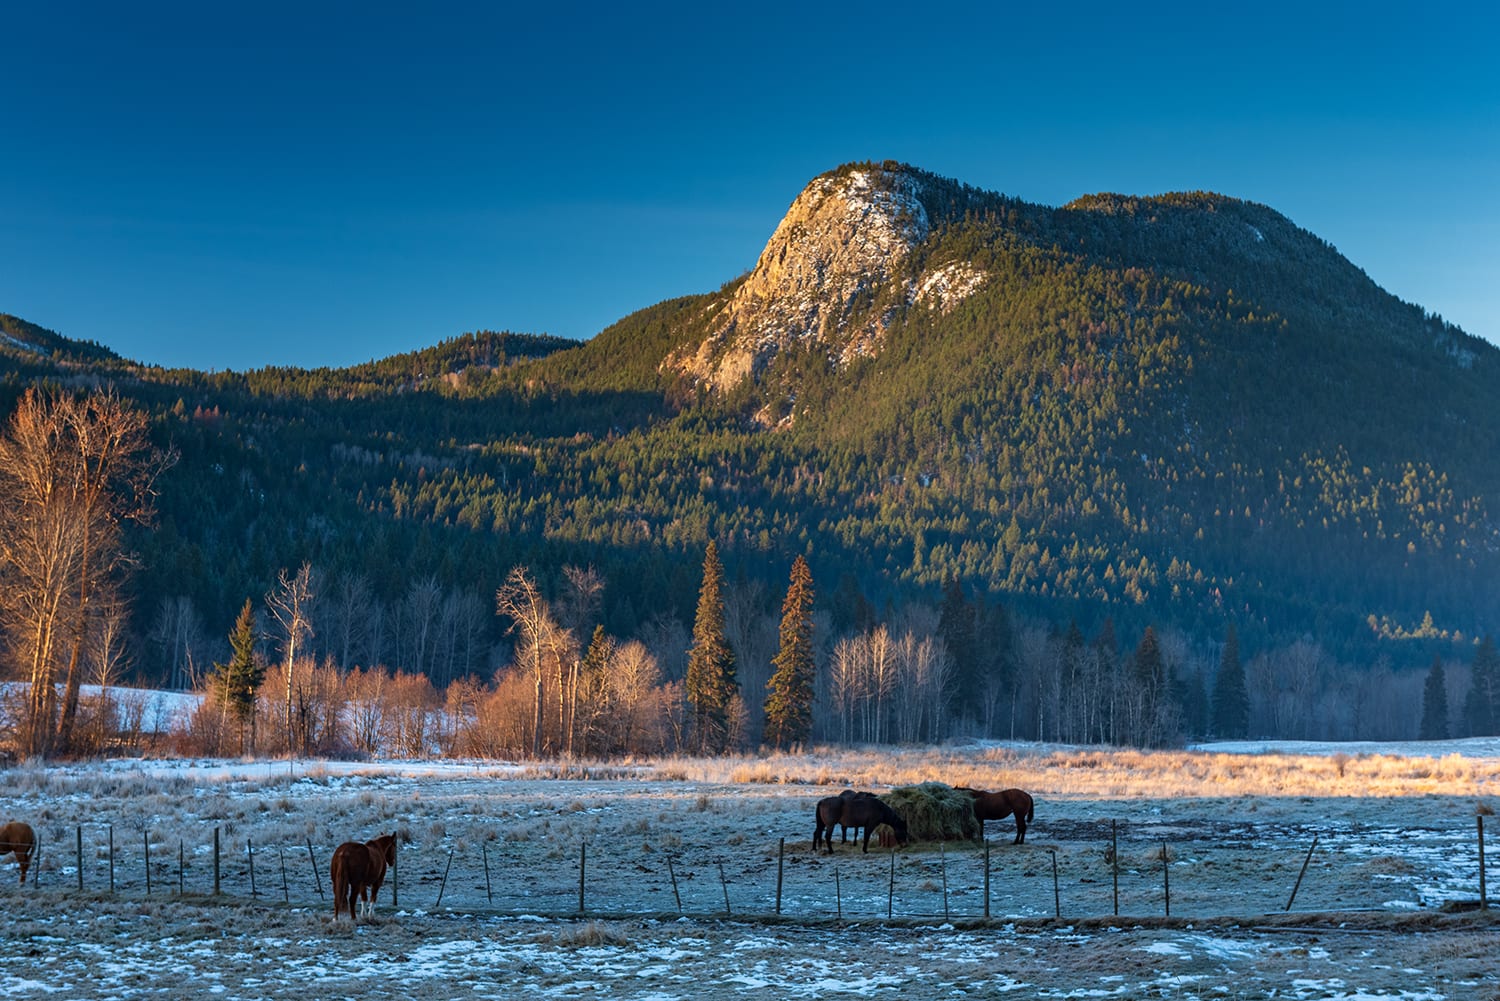 Kamloops rural life grassy fields with horses and trees with mountain